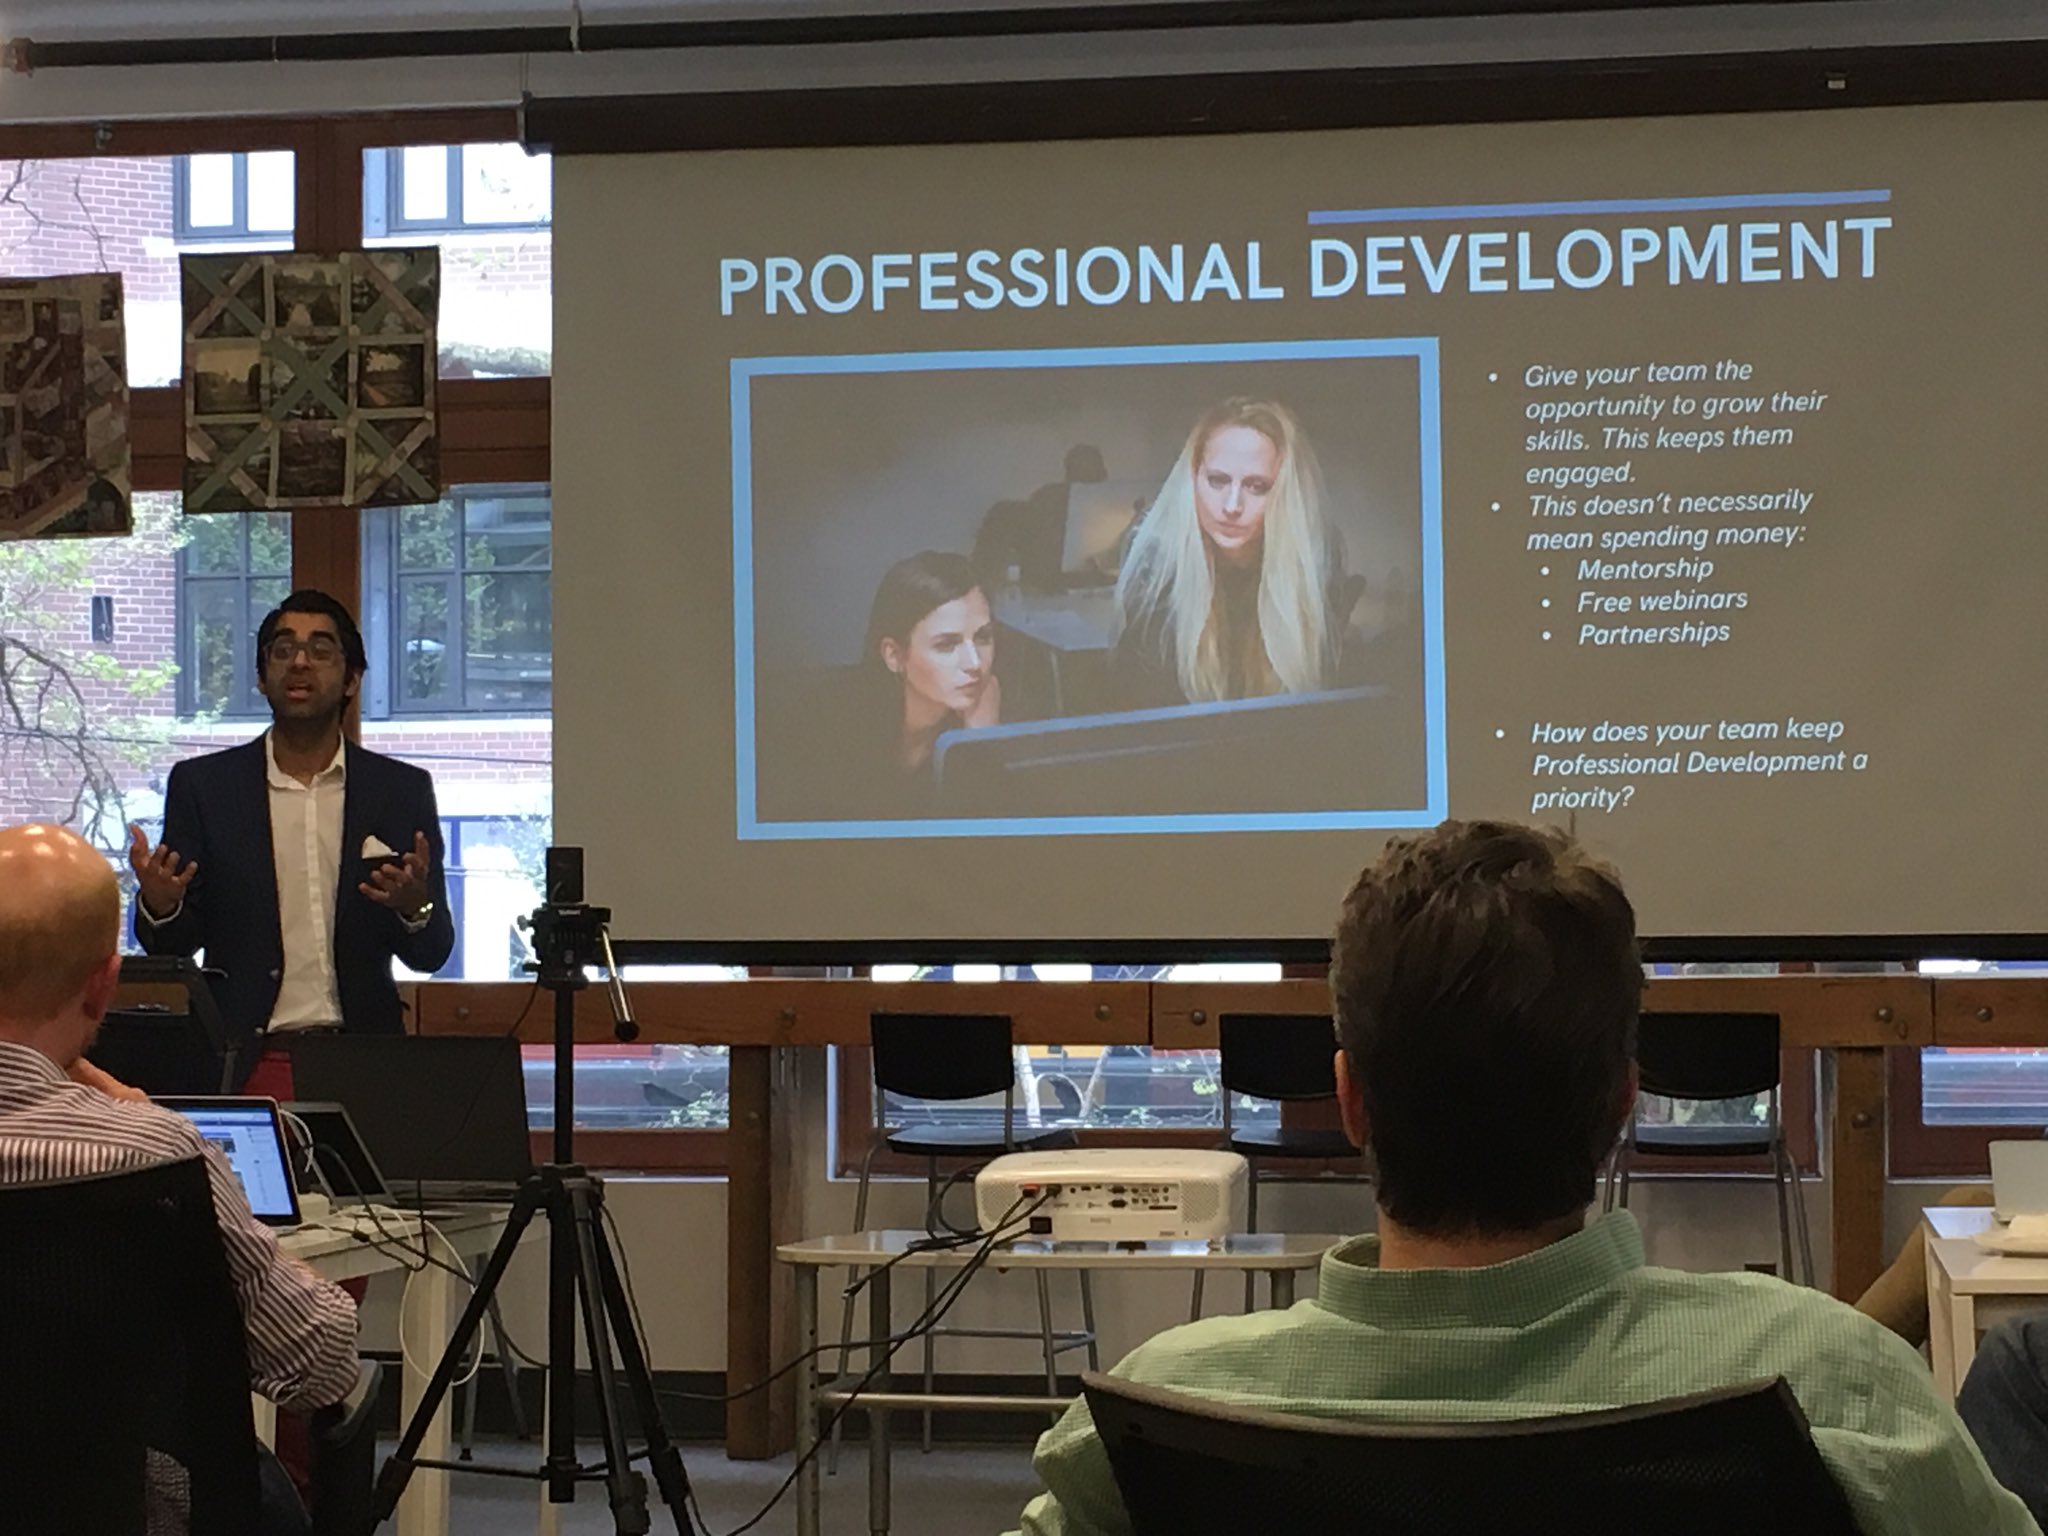 Professional development is a great way to engage your remote teams! #net2van @nejeed @NetSquared https://t.co/wZS1FfdUya